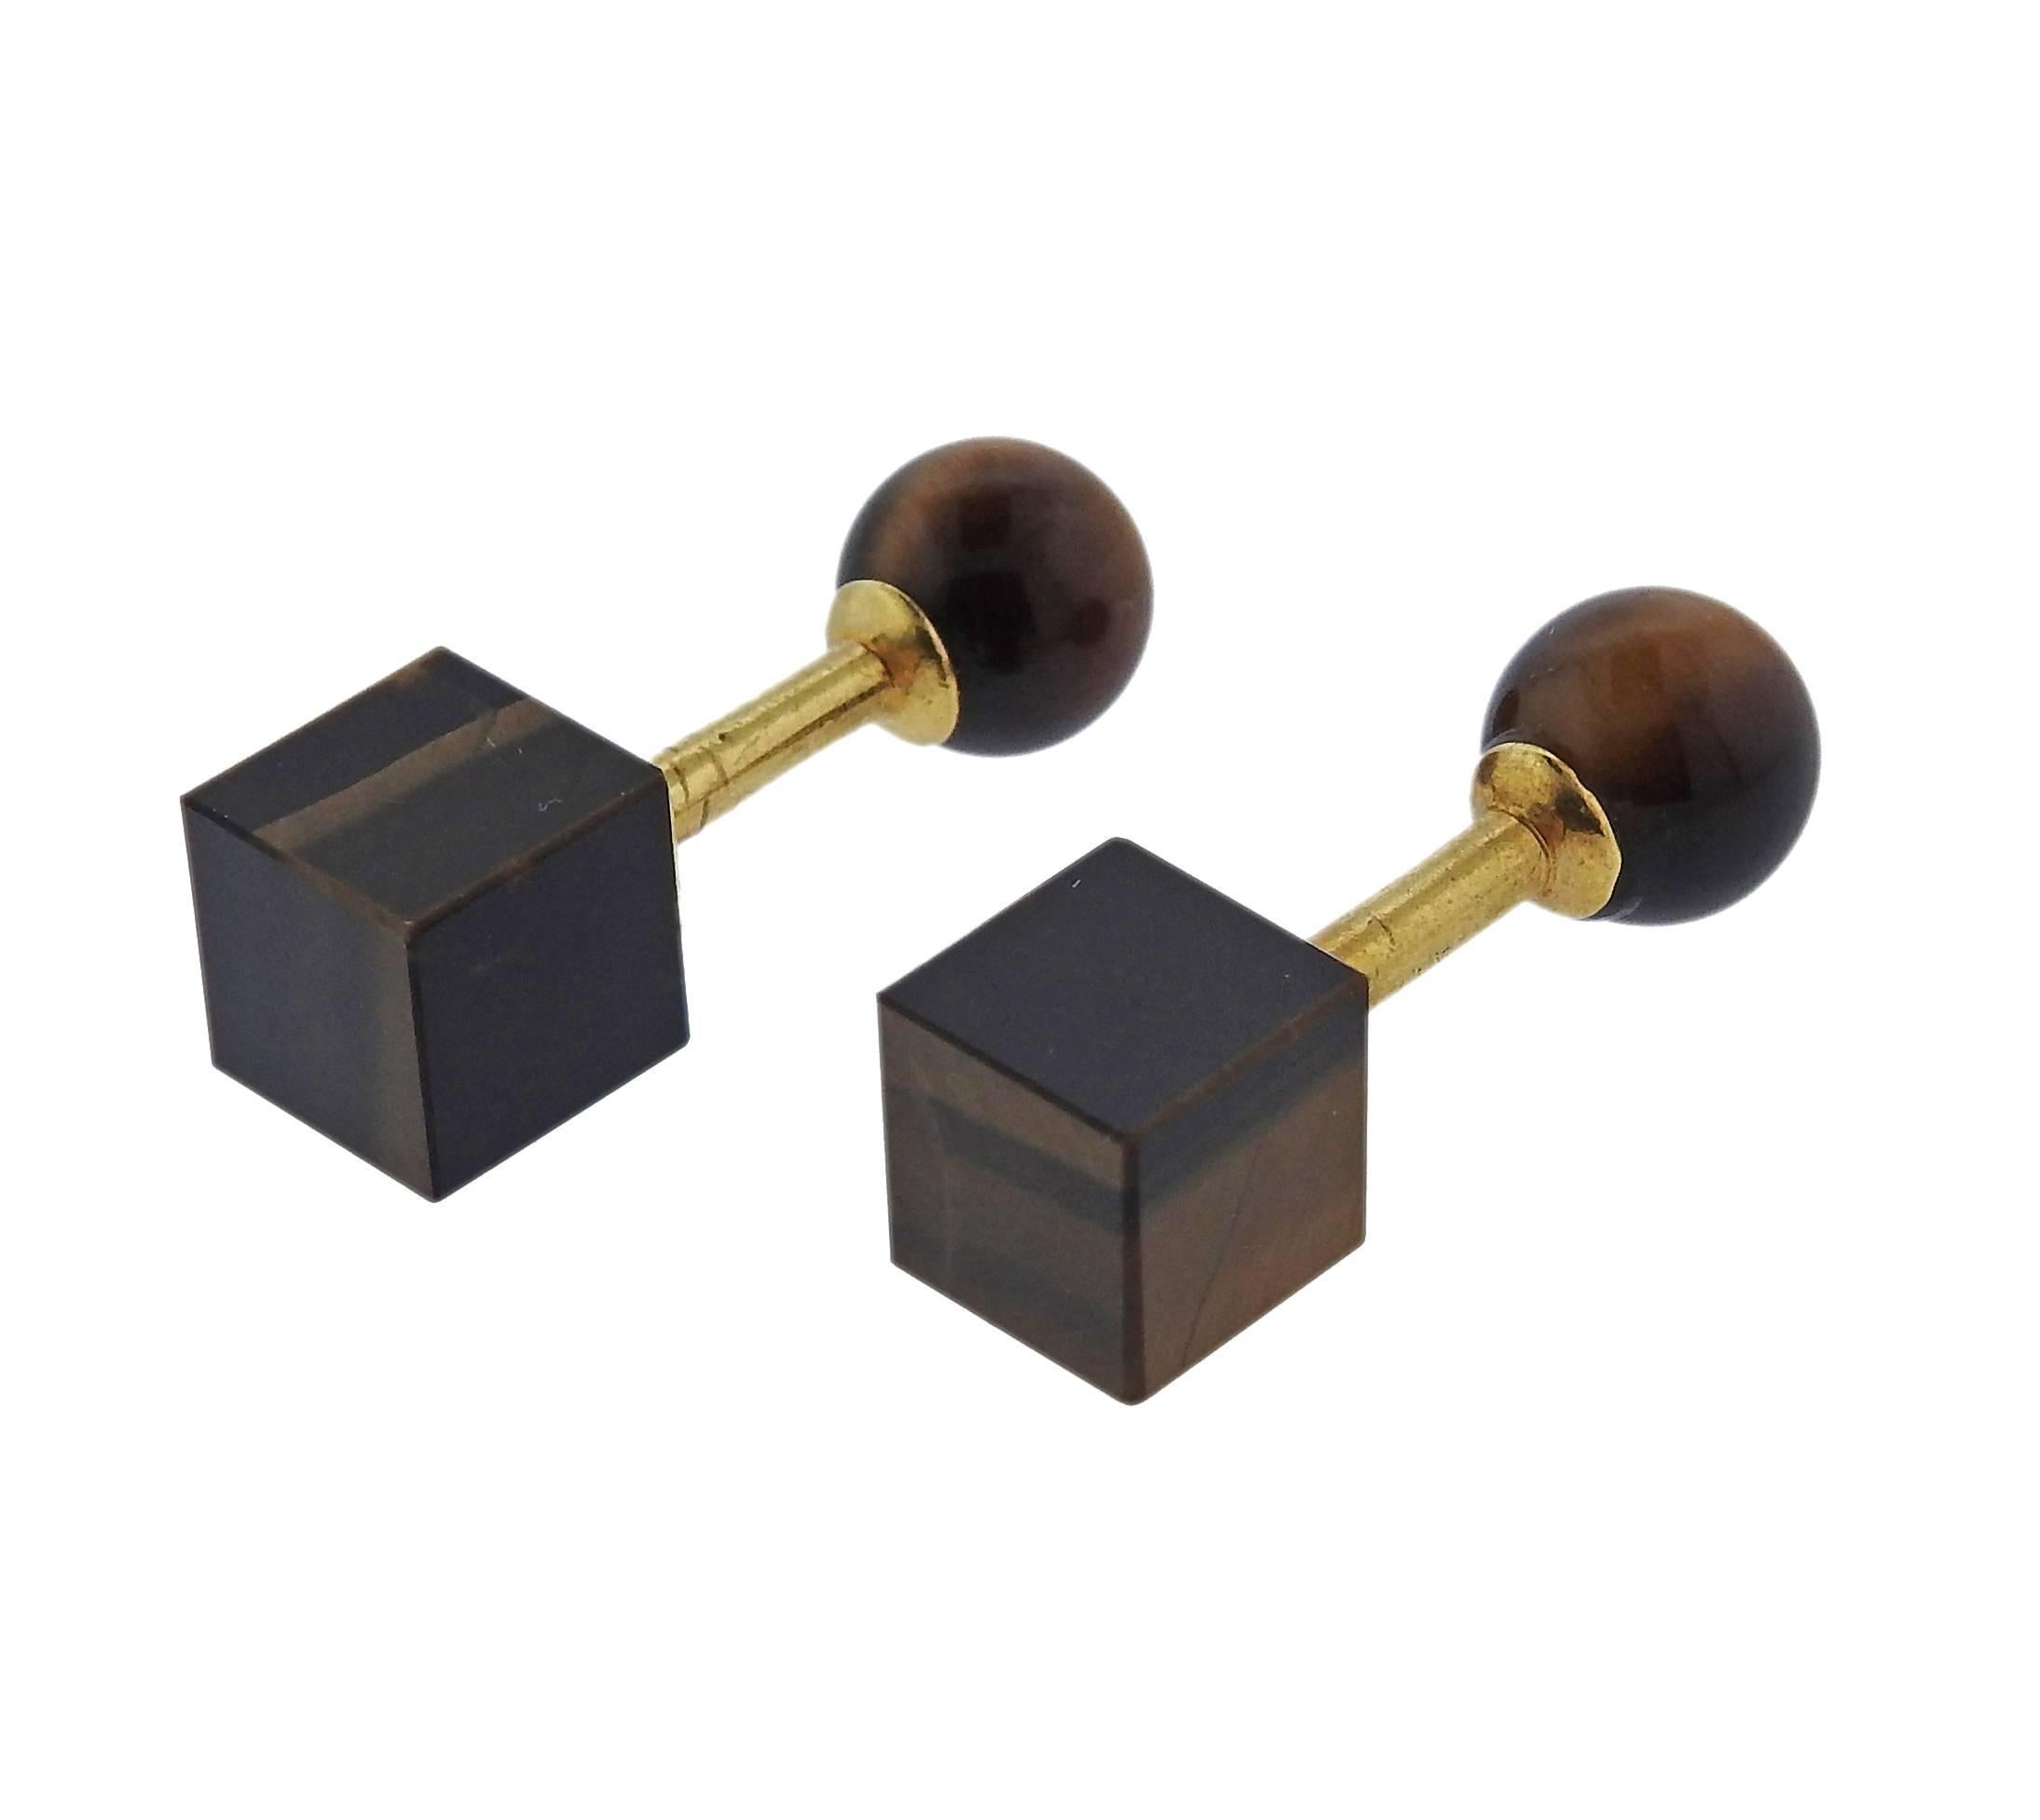 Pair of 18k yellow gold geometric cufflinks, crafted by Tiffany & Co, featuring tiger's eye ball and a cube top. Ball is 9mm in diameter, cube - 8.9mm x 8.9mm . Marked: Tiffany 18k. Weight - 8.6 grams 